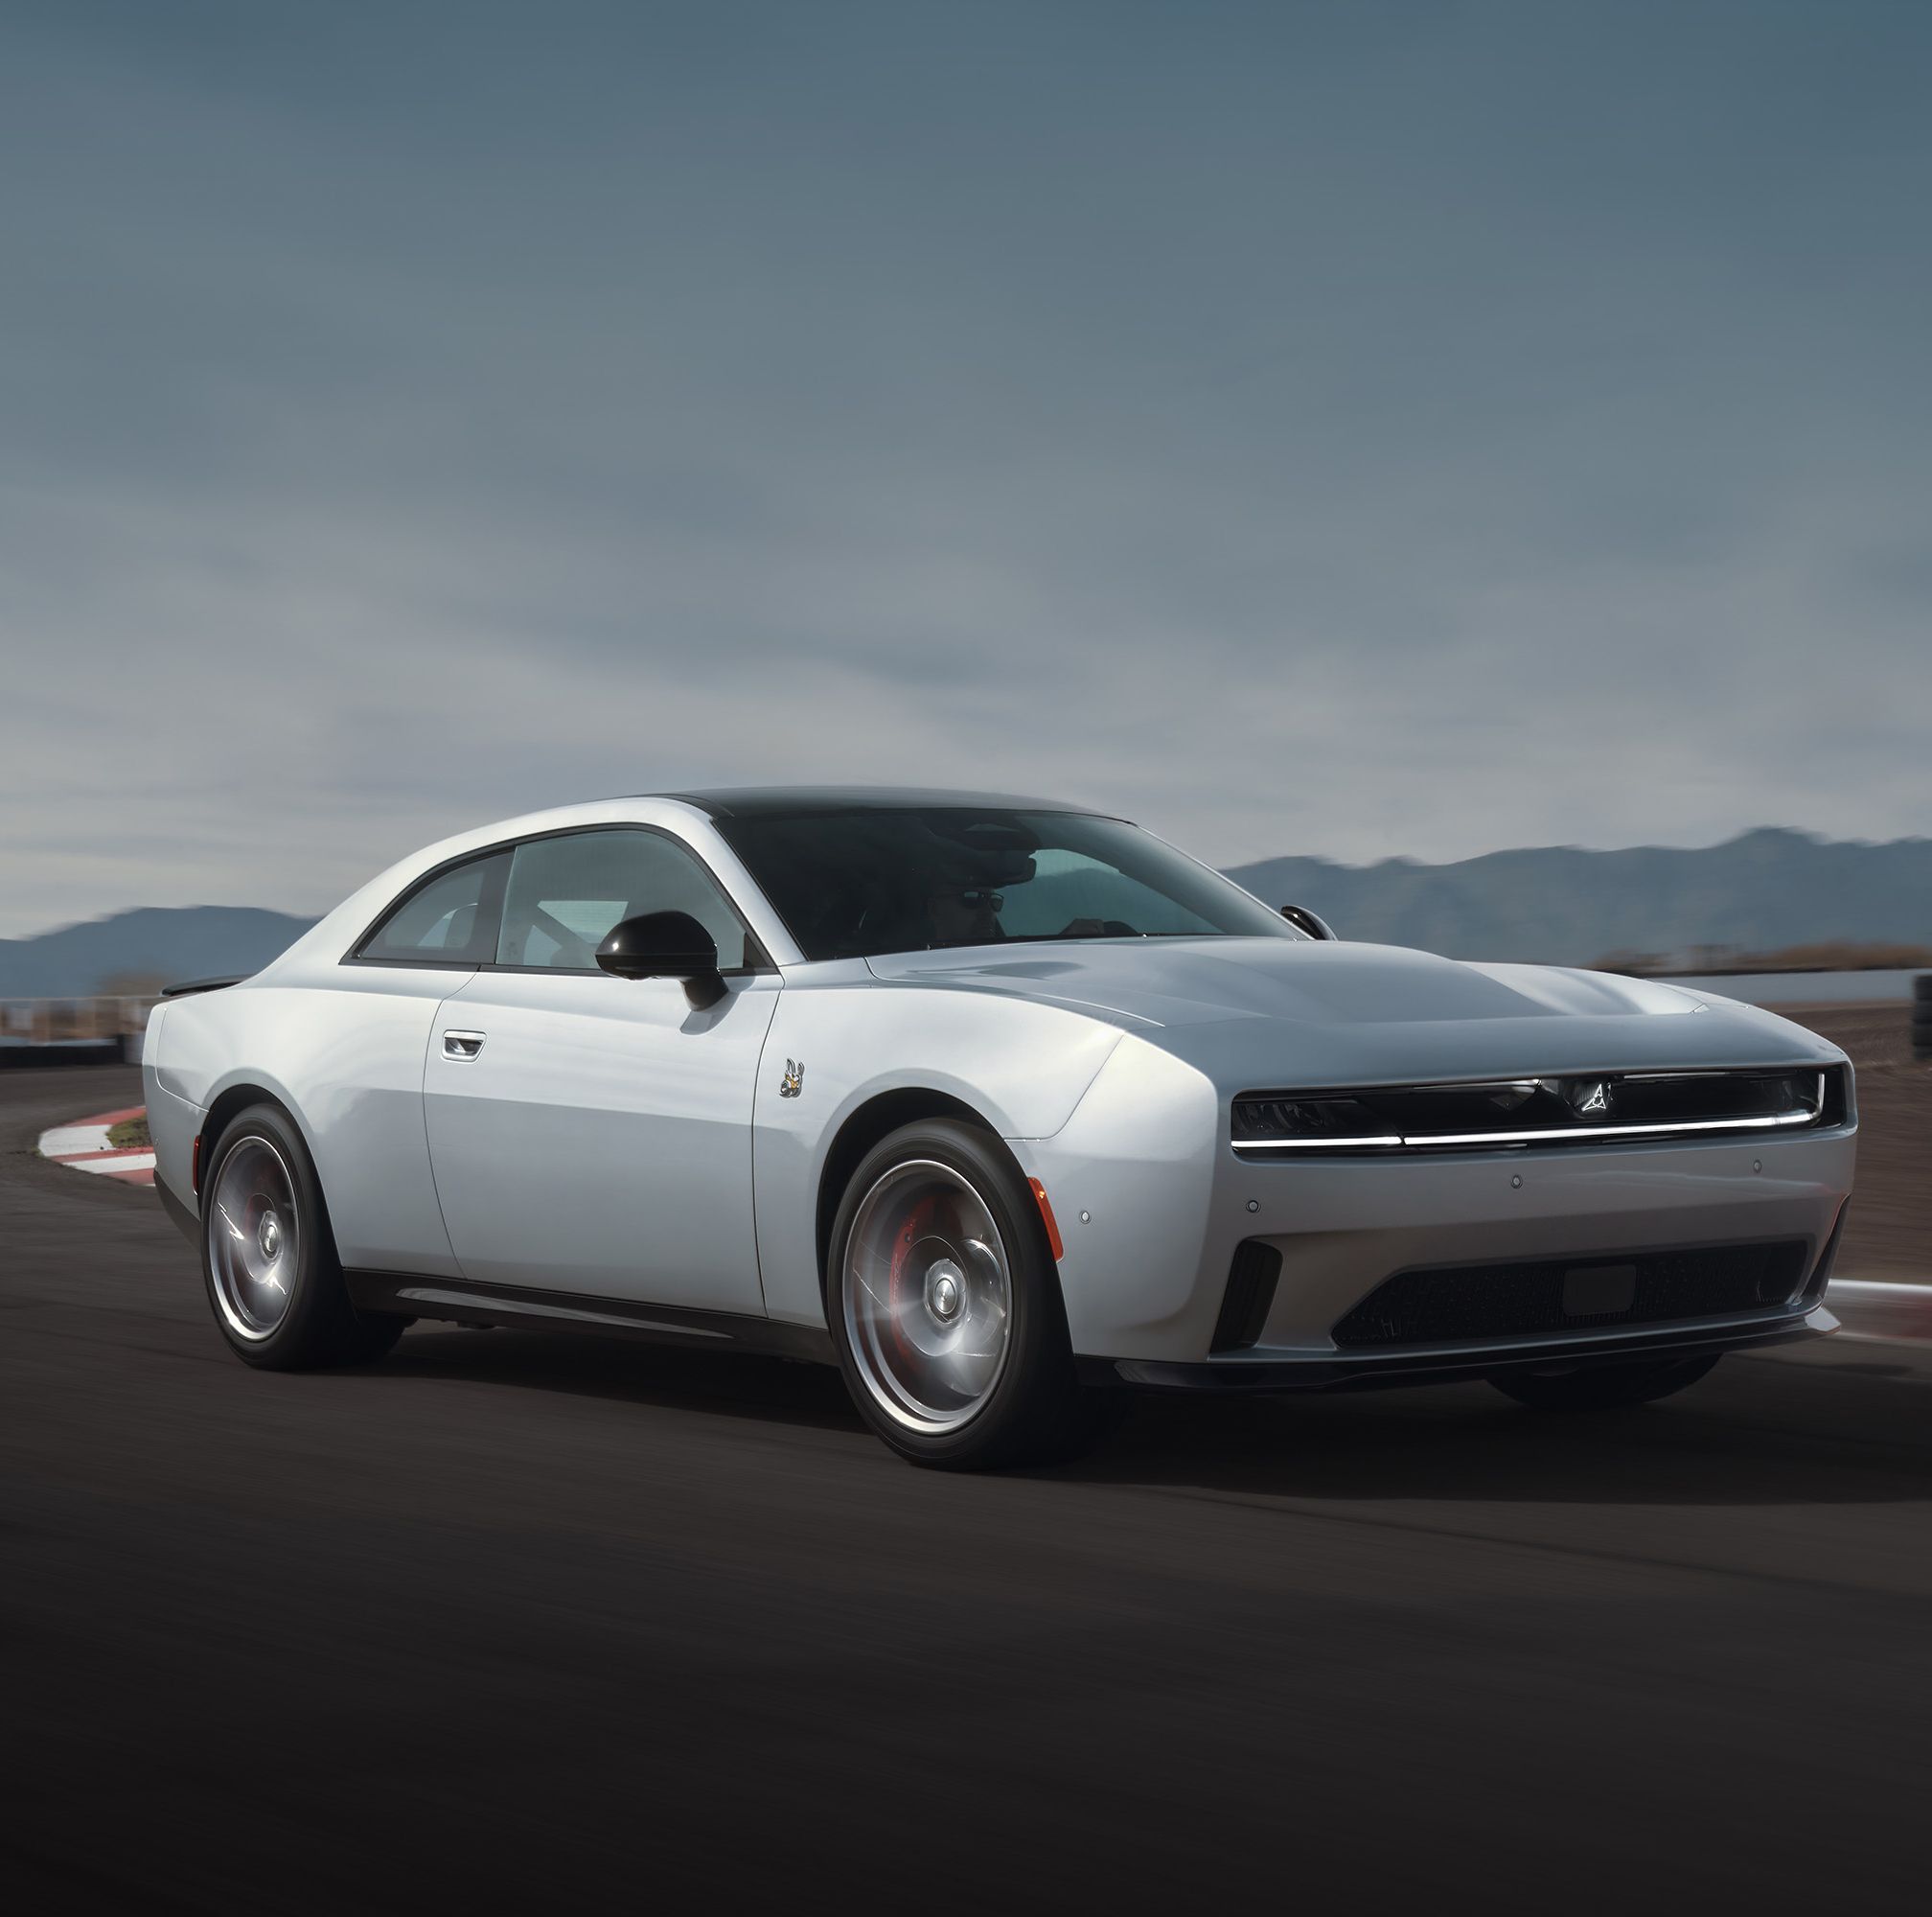 New Dodge Charger Is Here With Big EV Power, Two and Four Doors, and a Hurricane I-6